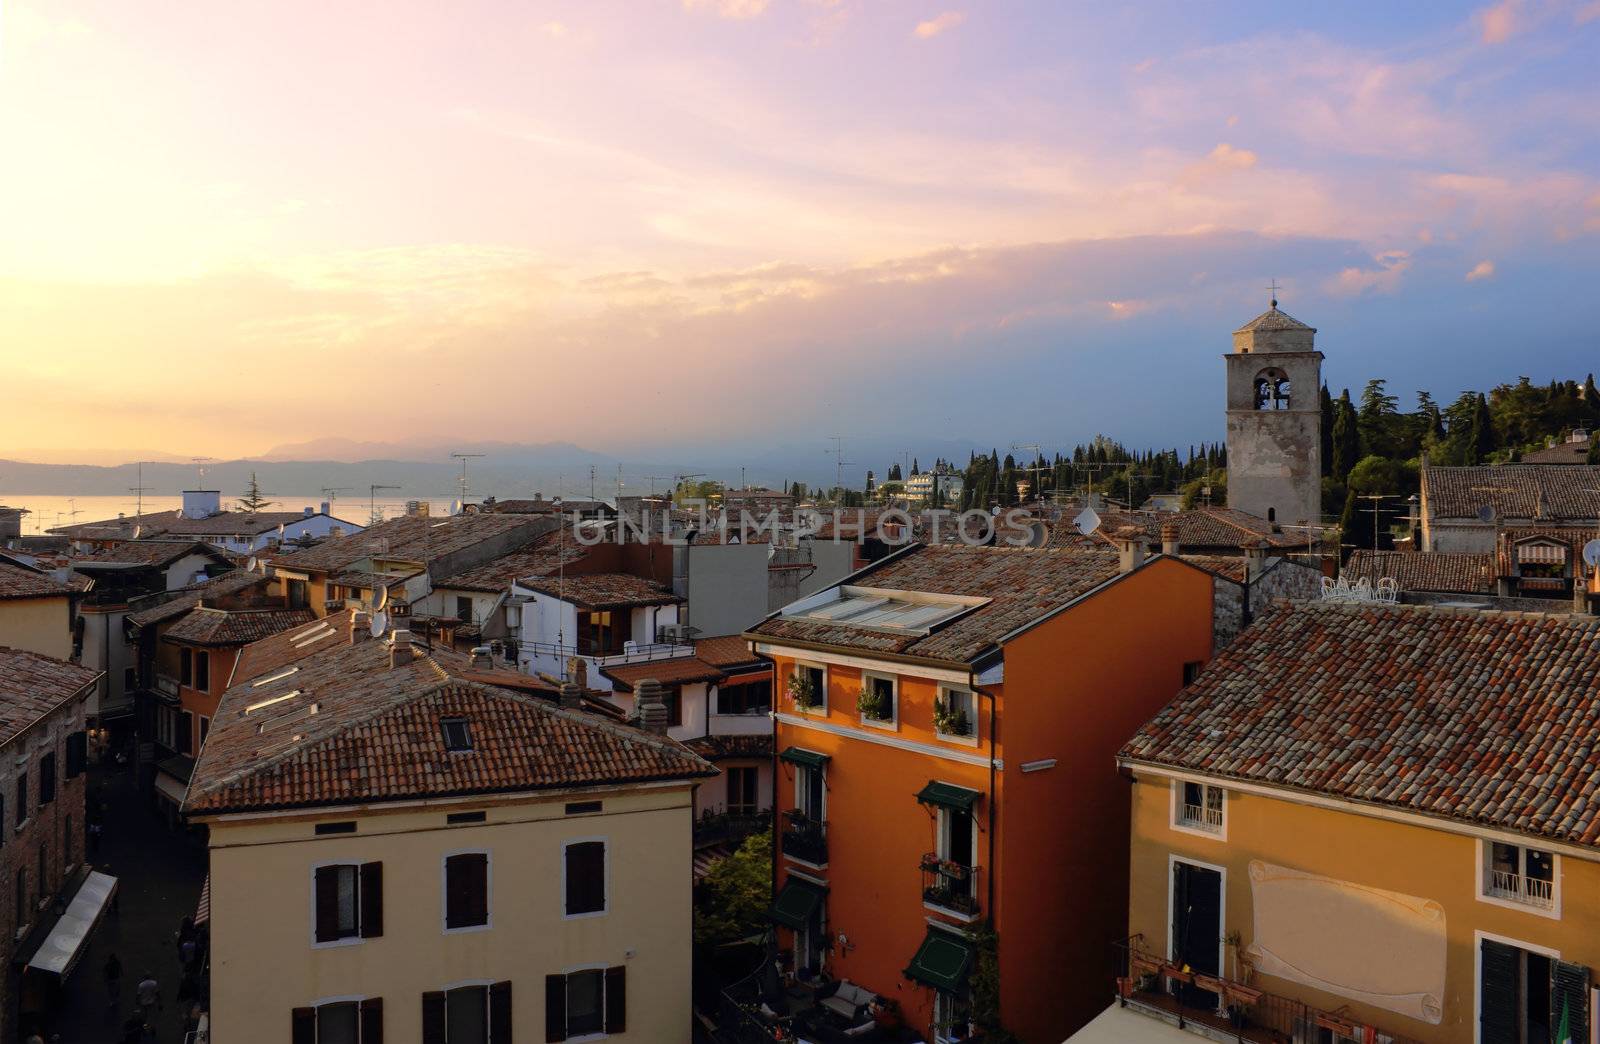 Early evening view of Sirmione in the warm light of the sunset with Lago di Garda at the background.